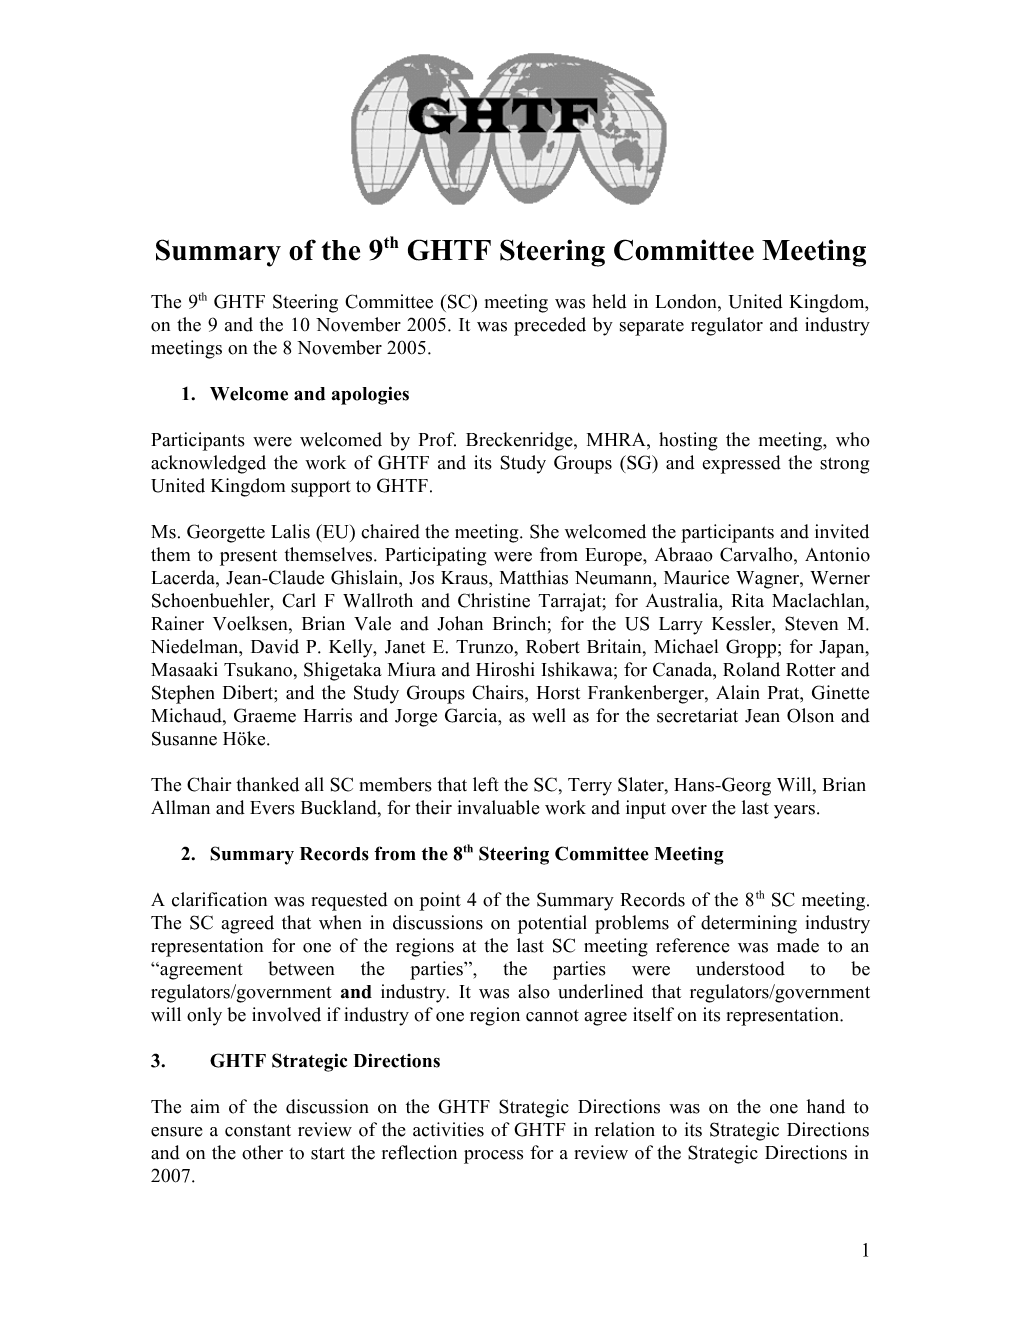 GHTF SC - Summary of the 9Th GHTF Steering Committee Meeting - November 2005